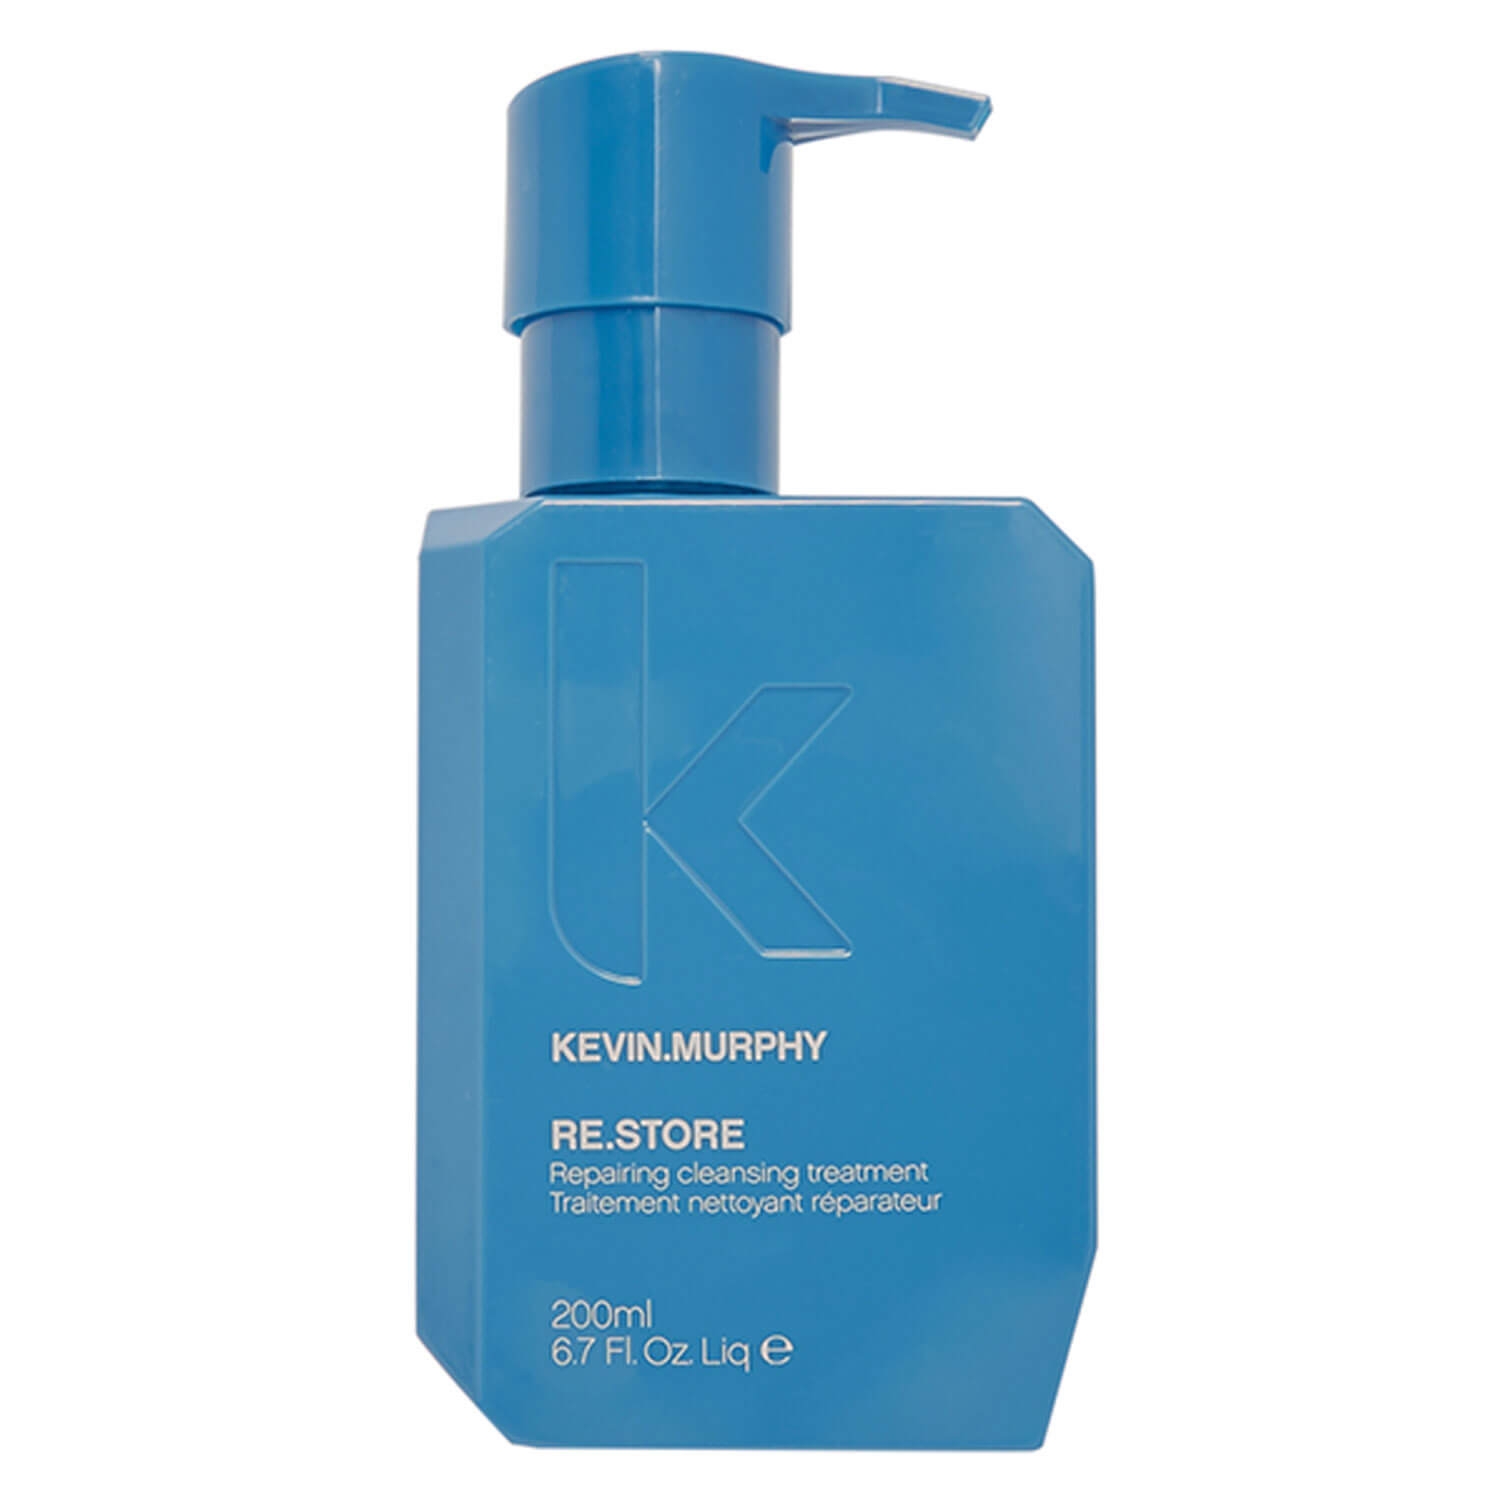 Product image from Re.Store - Cleansing Treatment